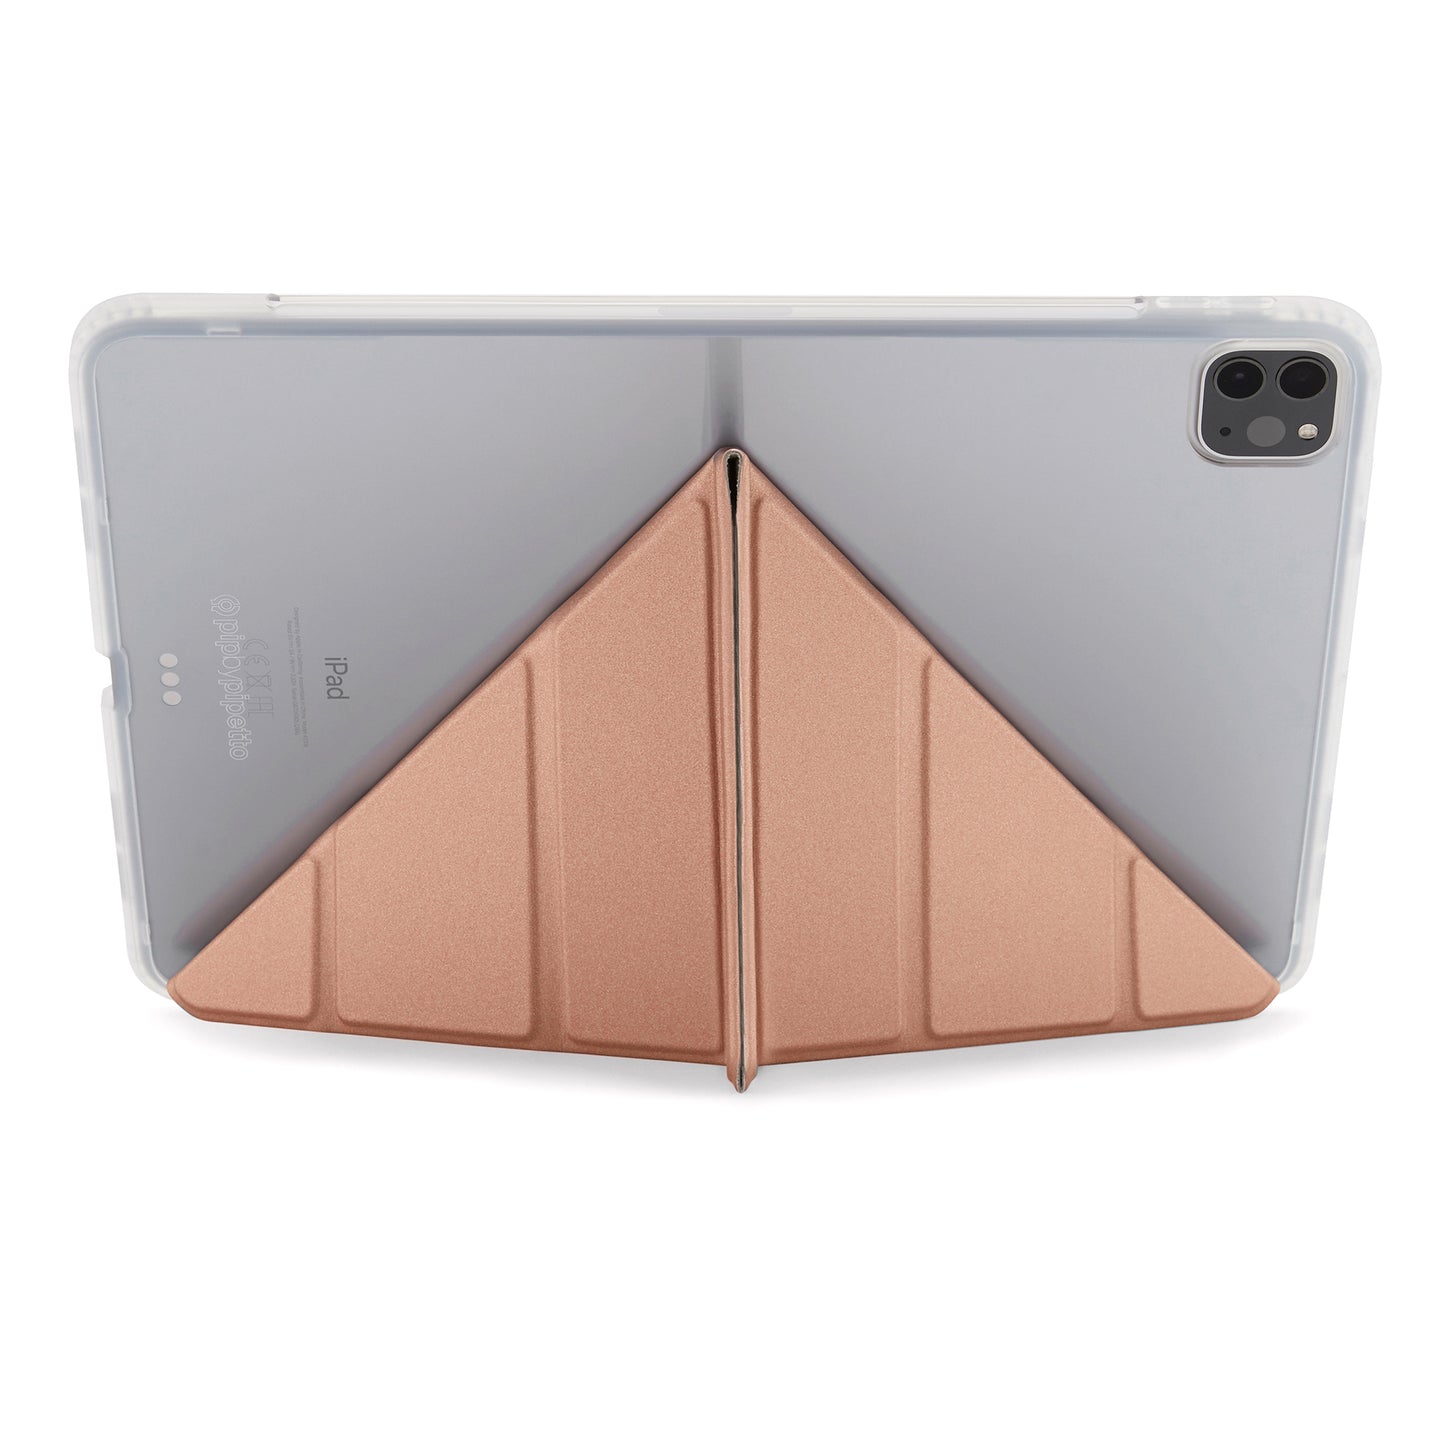 PIPETTO Origami No1 Case for iPad Pro 11 1st-4th Gen (2018-2022) - Rose Gold